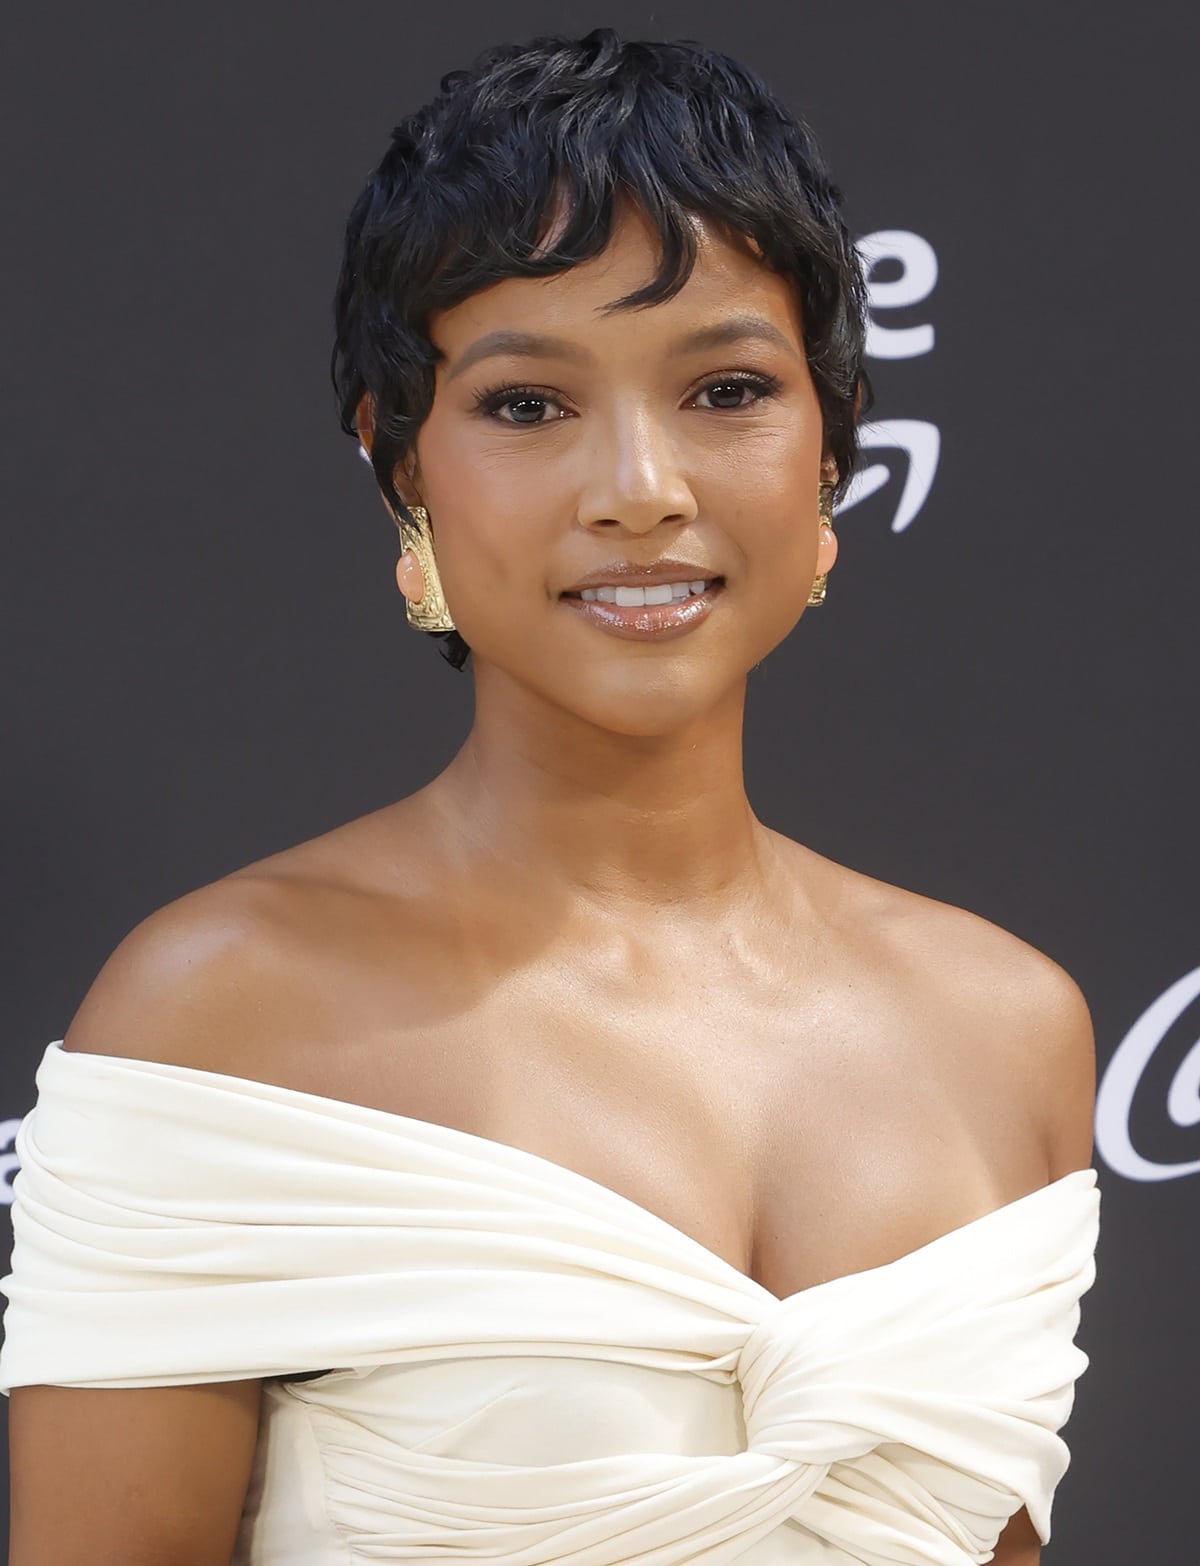 Karrueche Tran sported a short pixie cut, highlighting her beautiful features and high cheekbones, and looked radiant in a white off-the-shoulder Khaite blouse